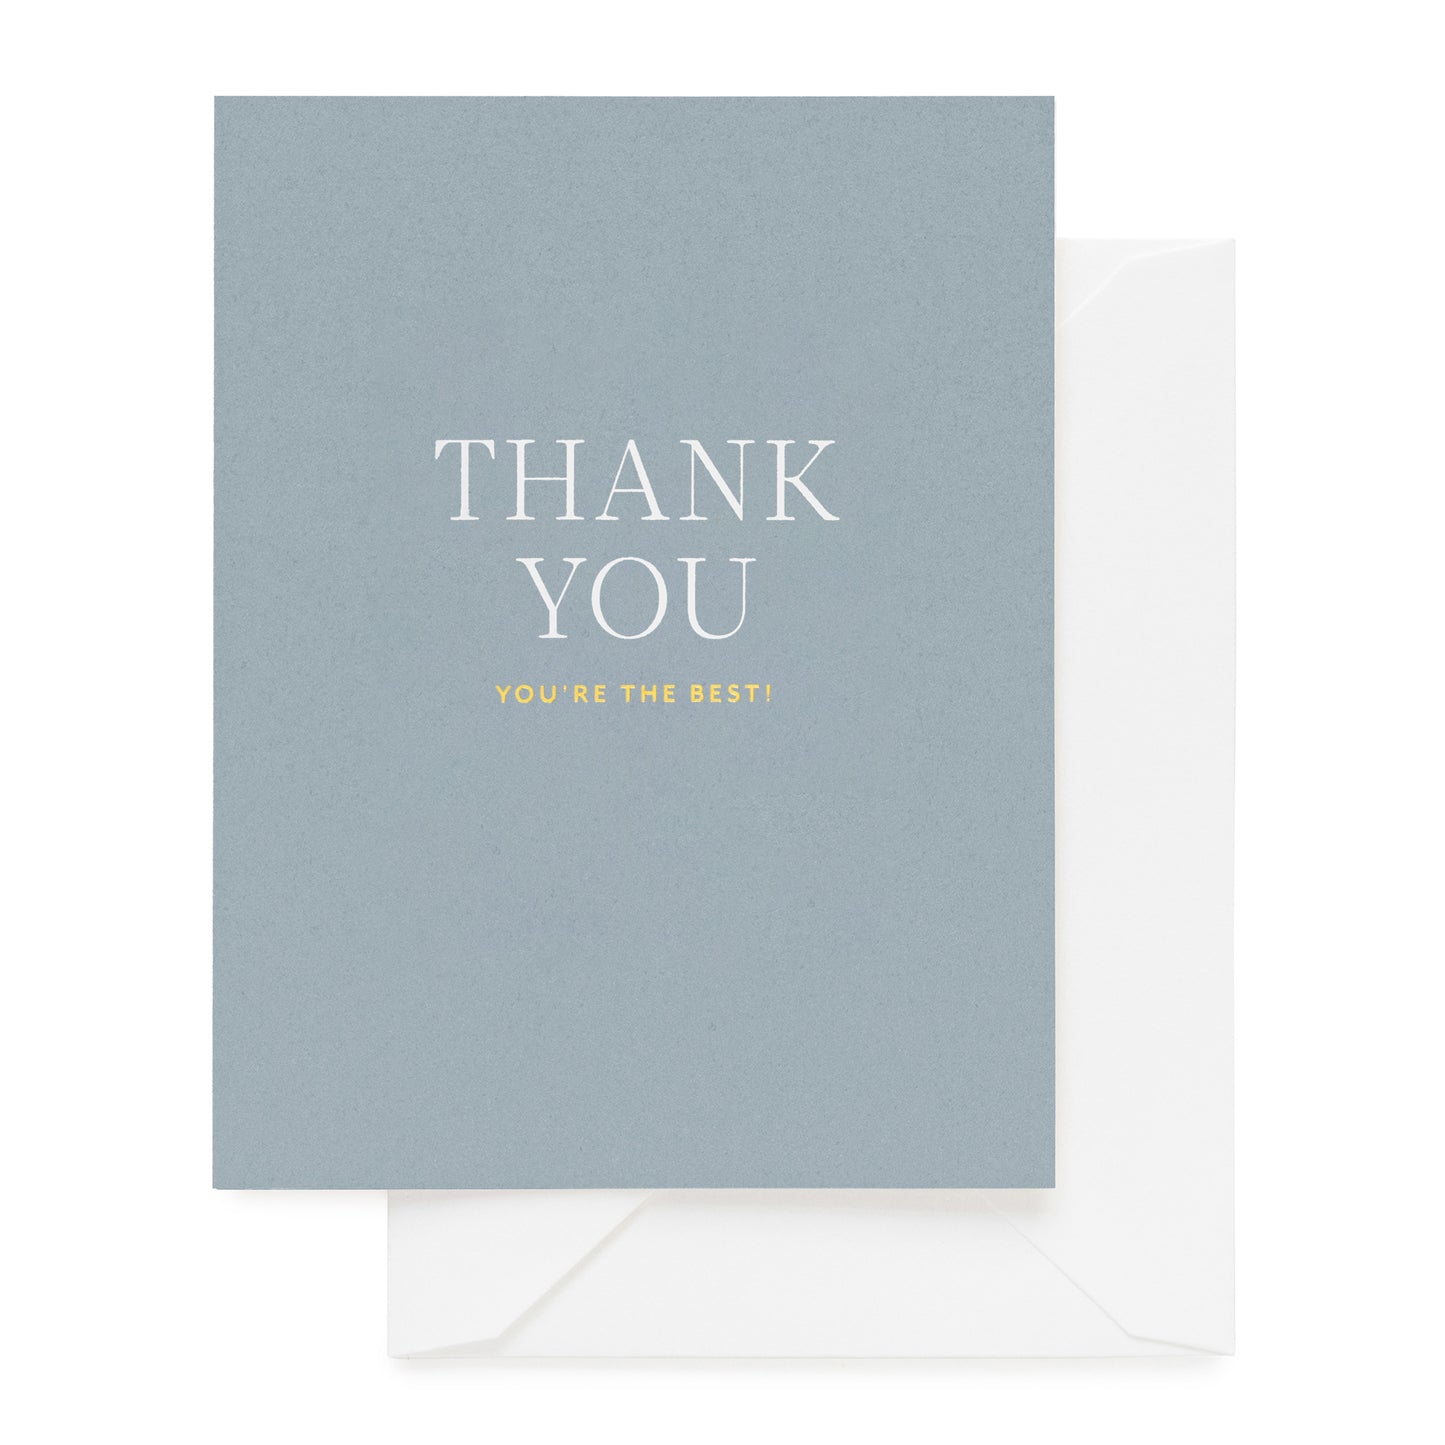 Slate blue card printed with thank you you're the best in white and gold foil